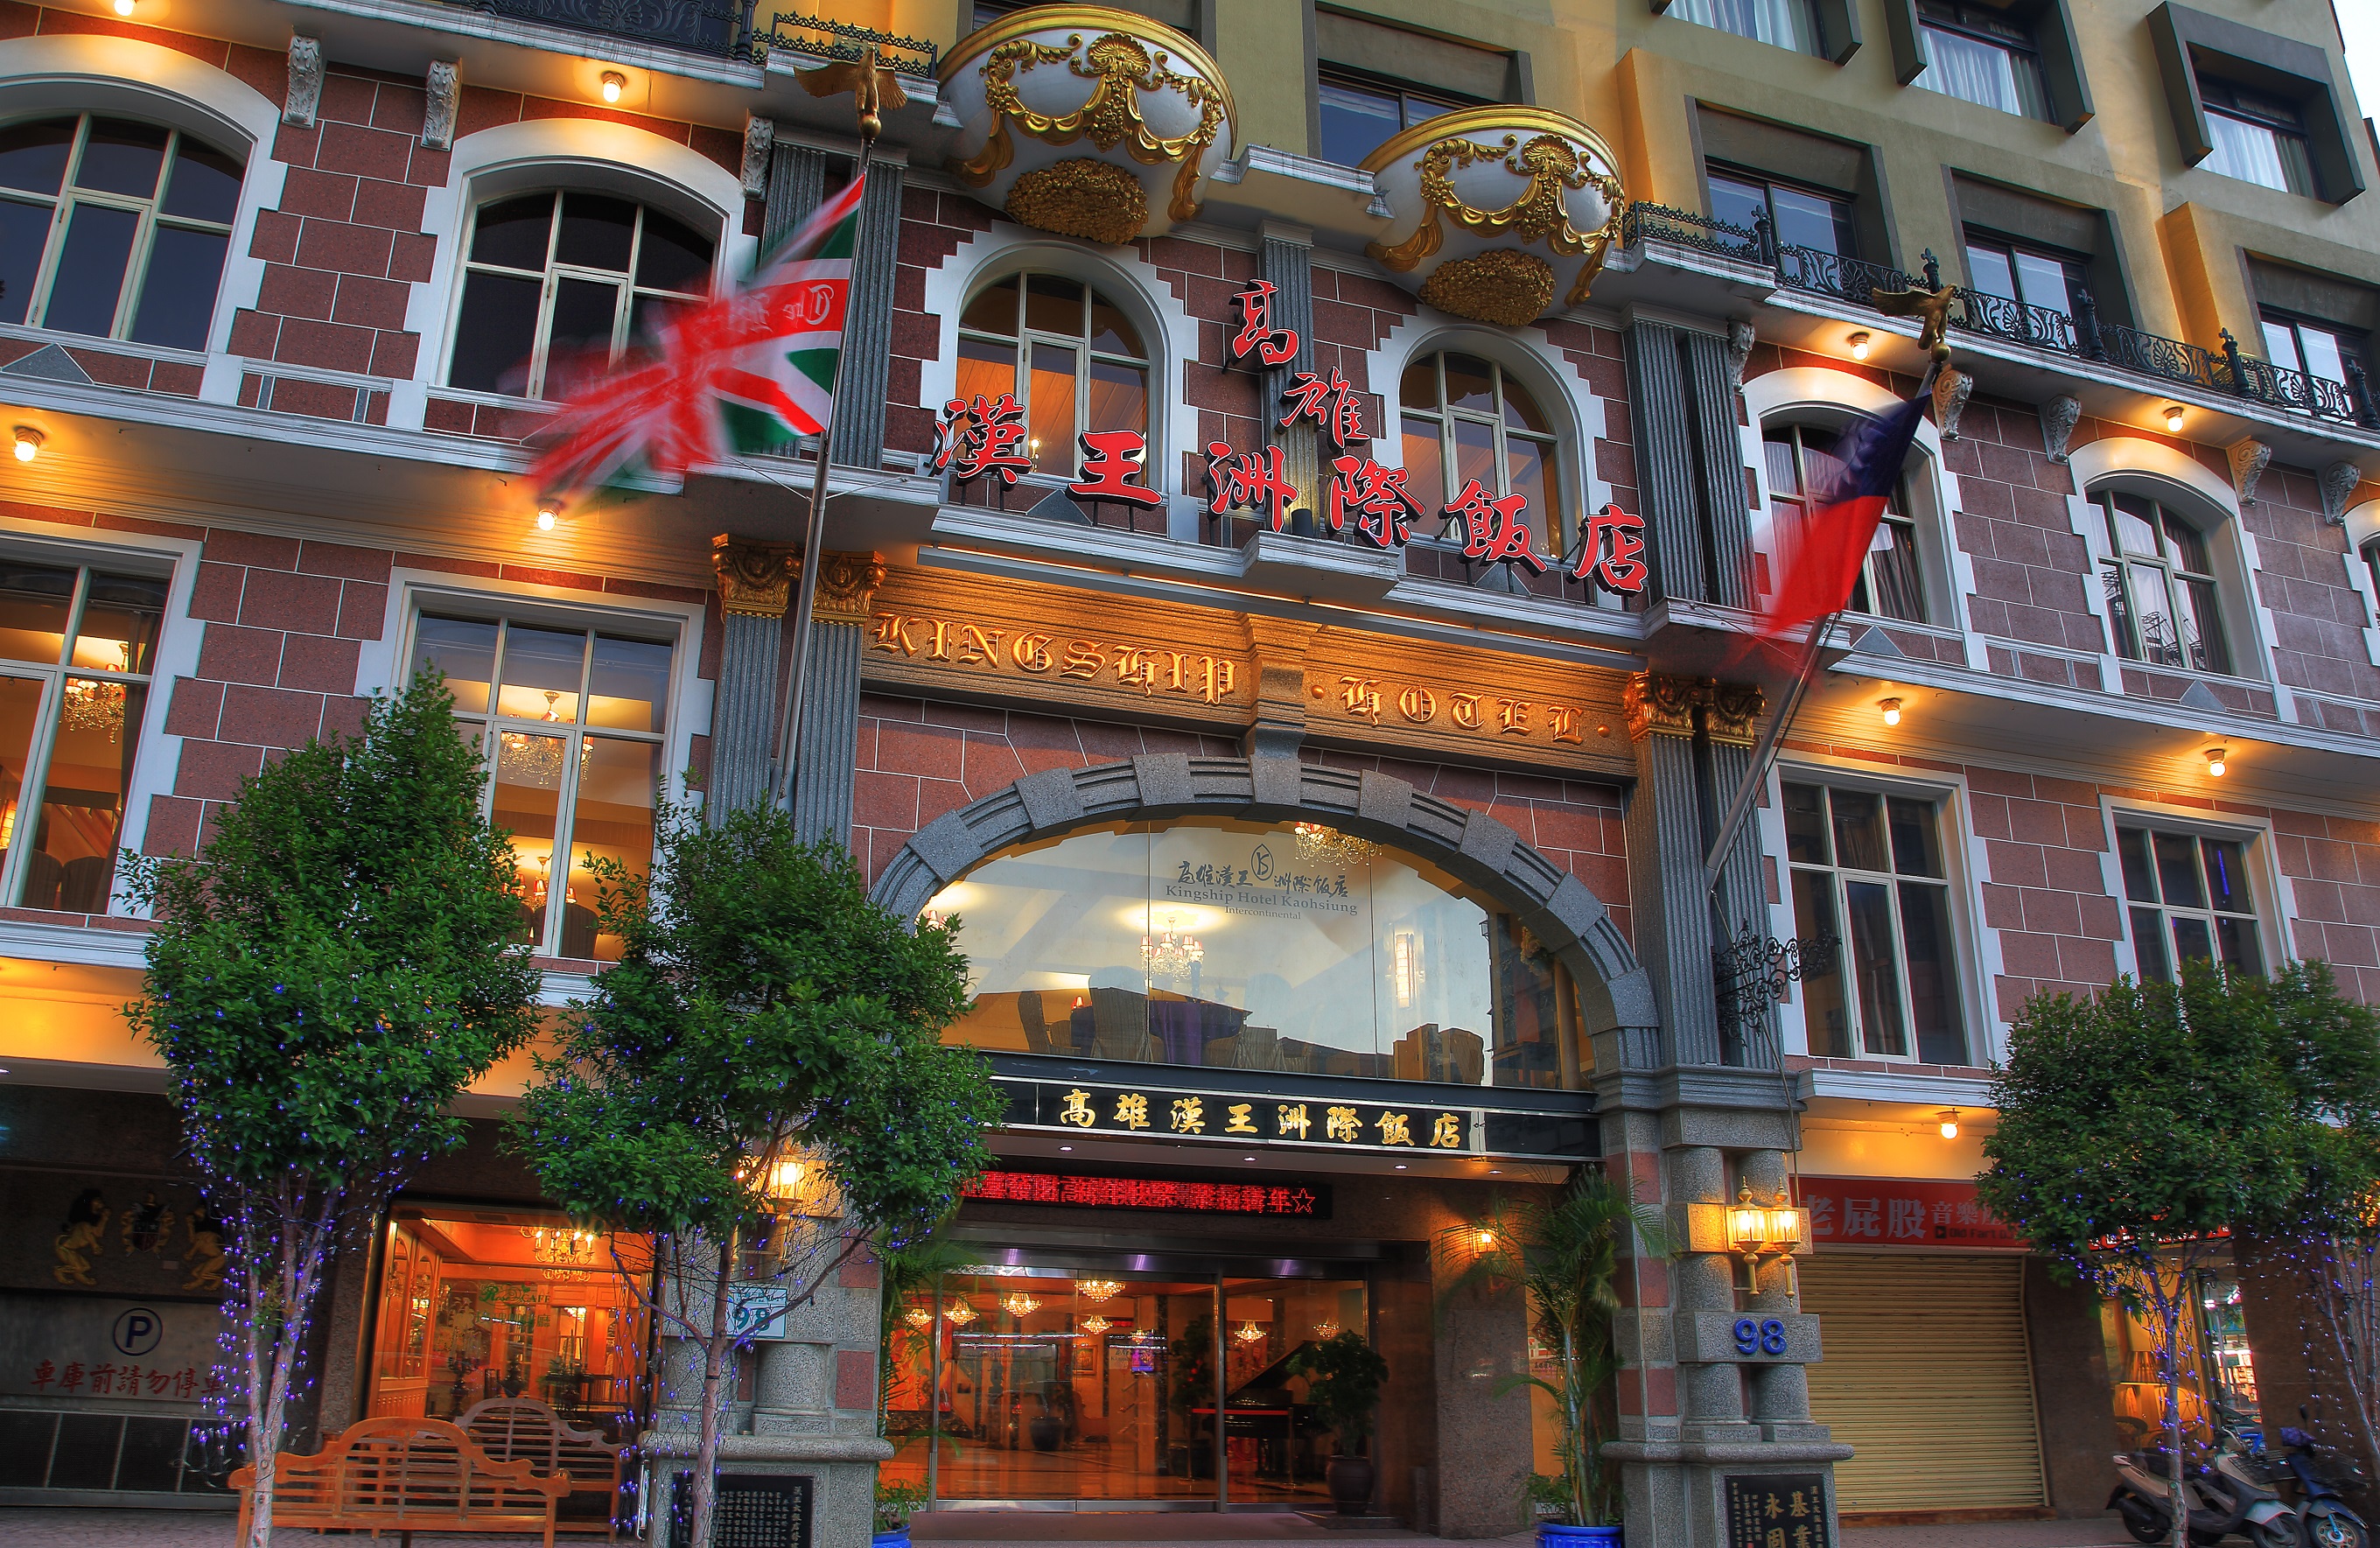 The Kingship Hotel Kaohsiung